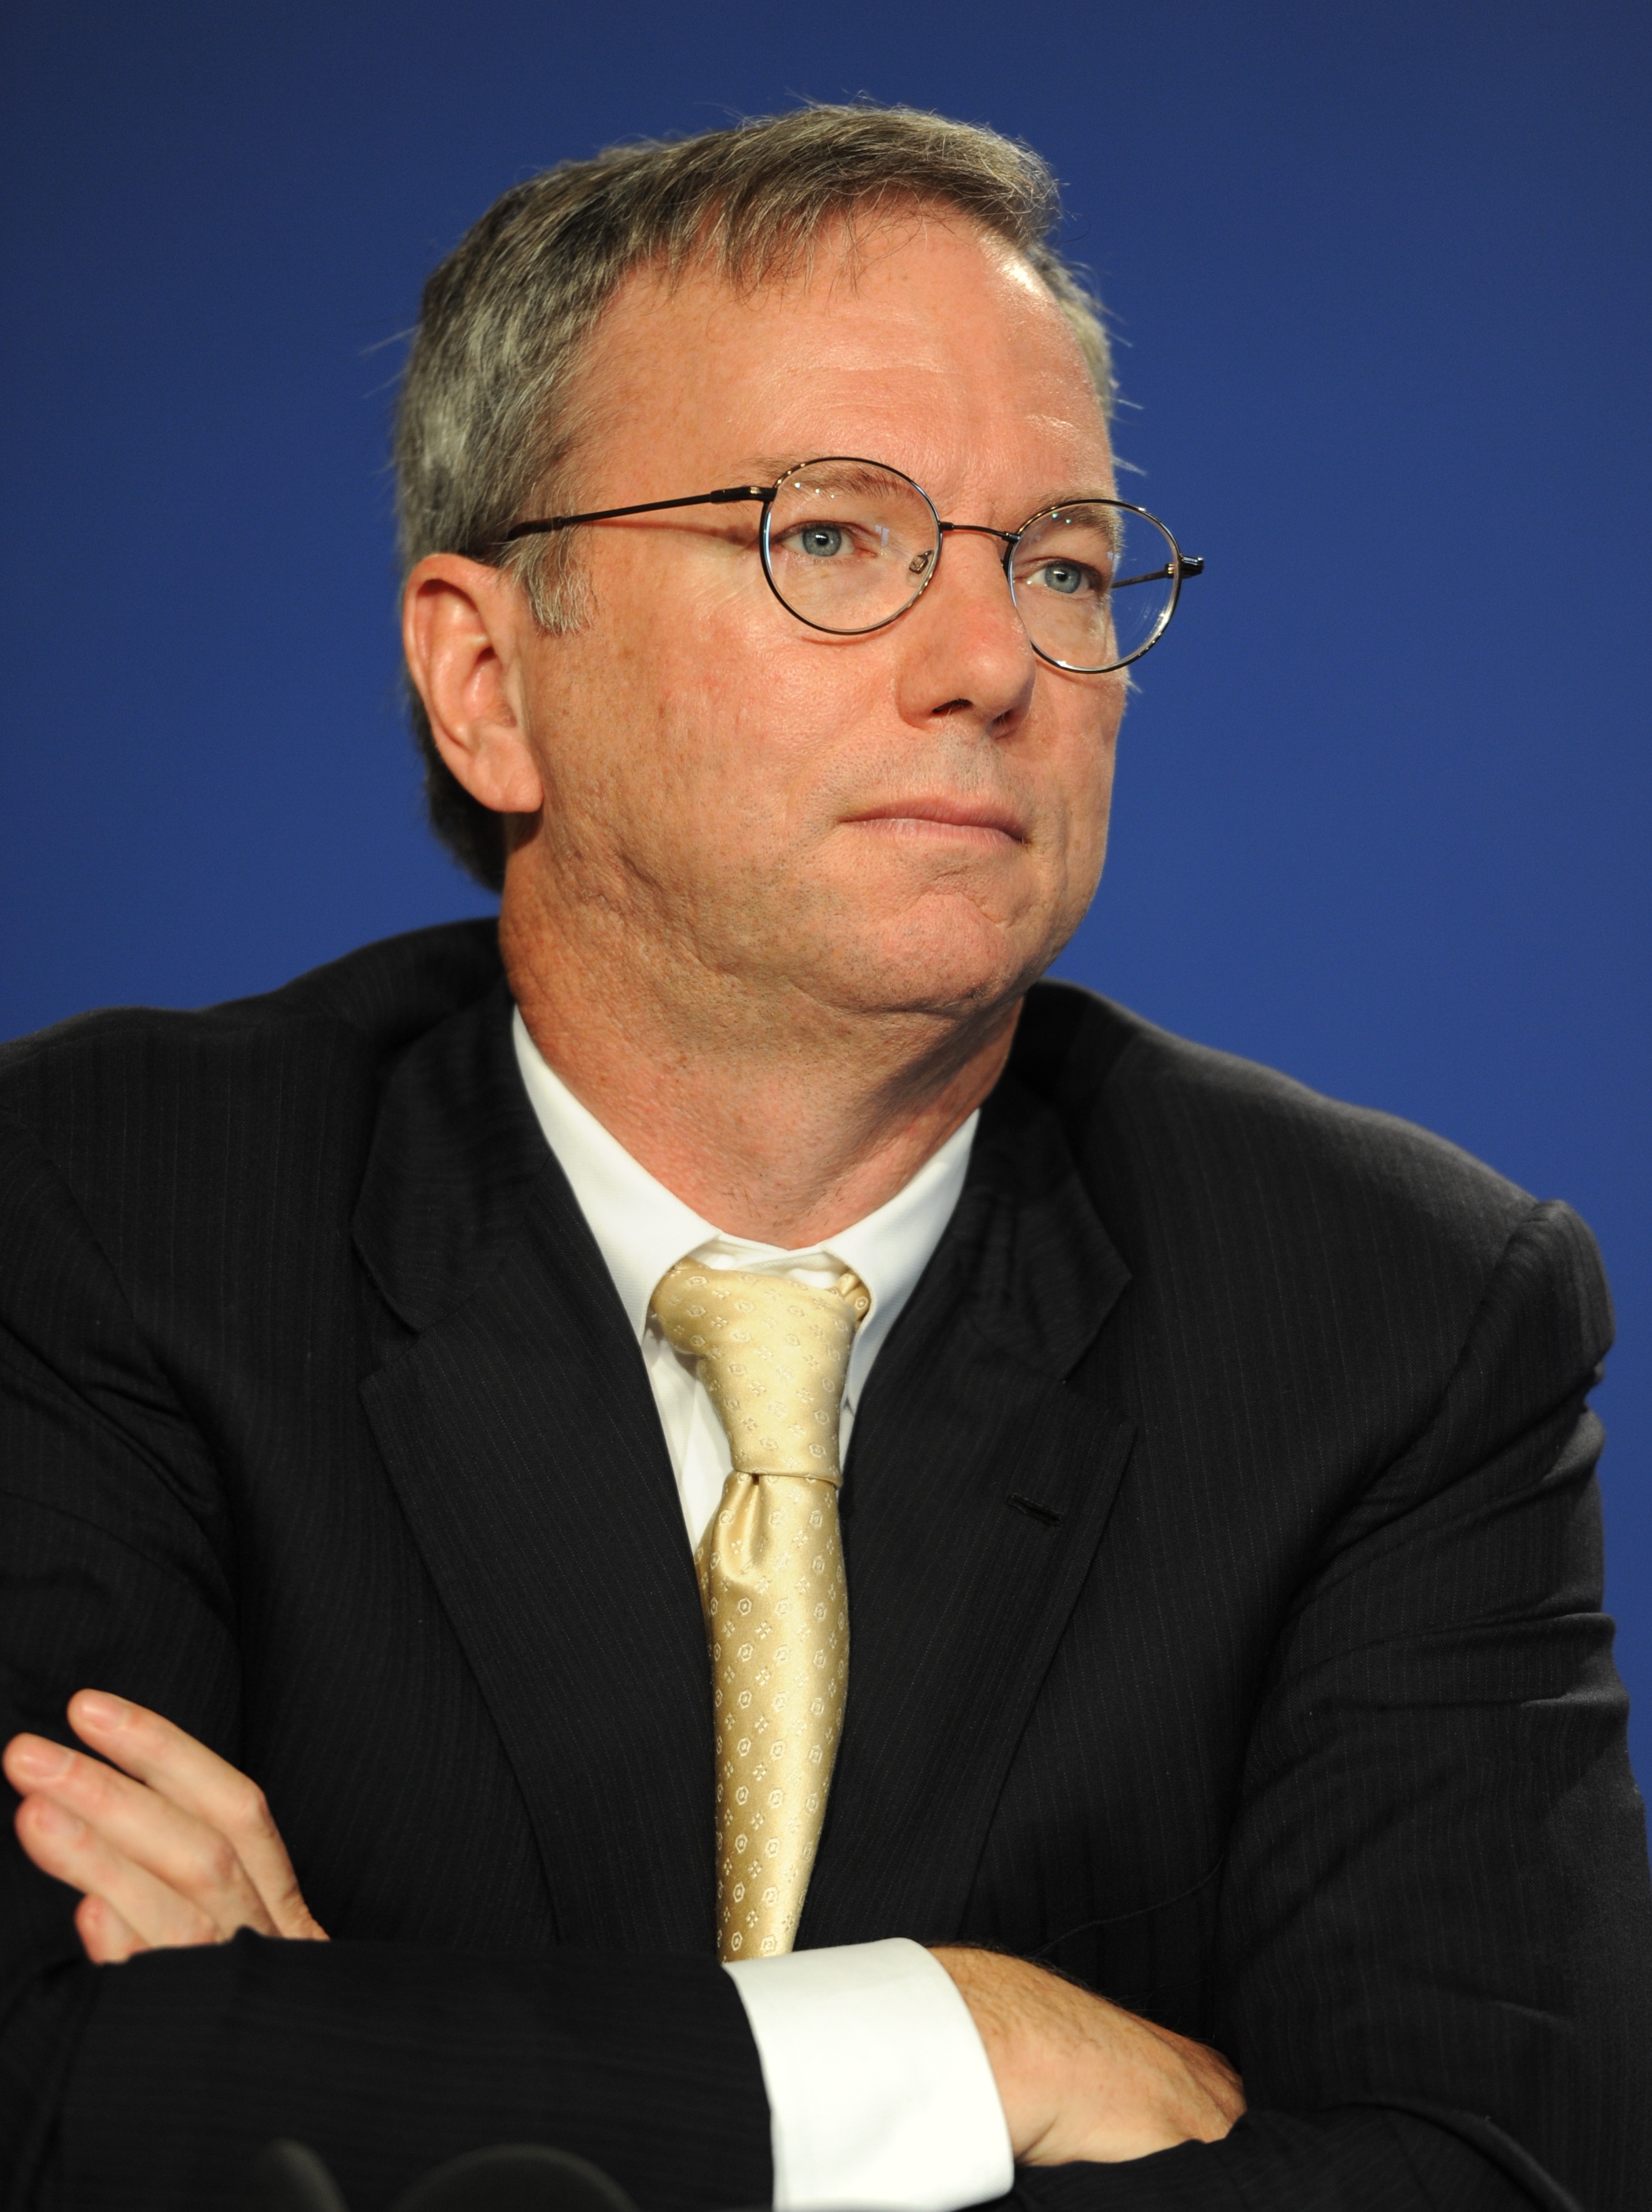 Eric_Schmidt_at_the_37th_G8_Summit_in_Deauville_037.jpg?width=400